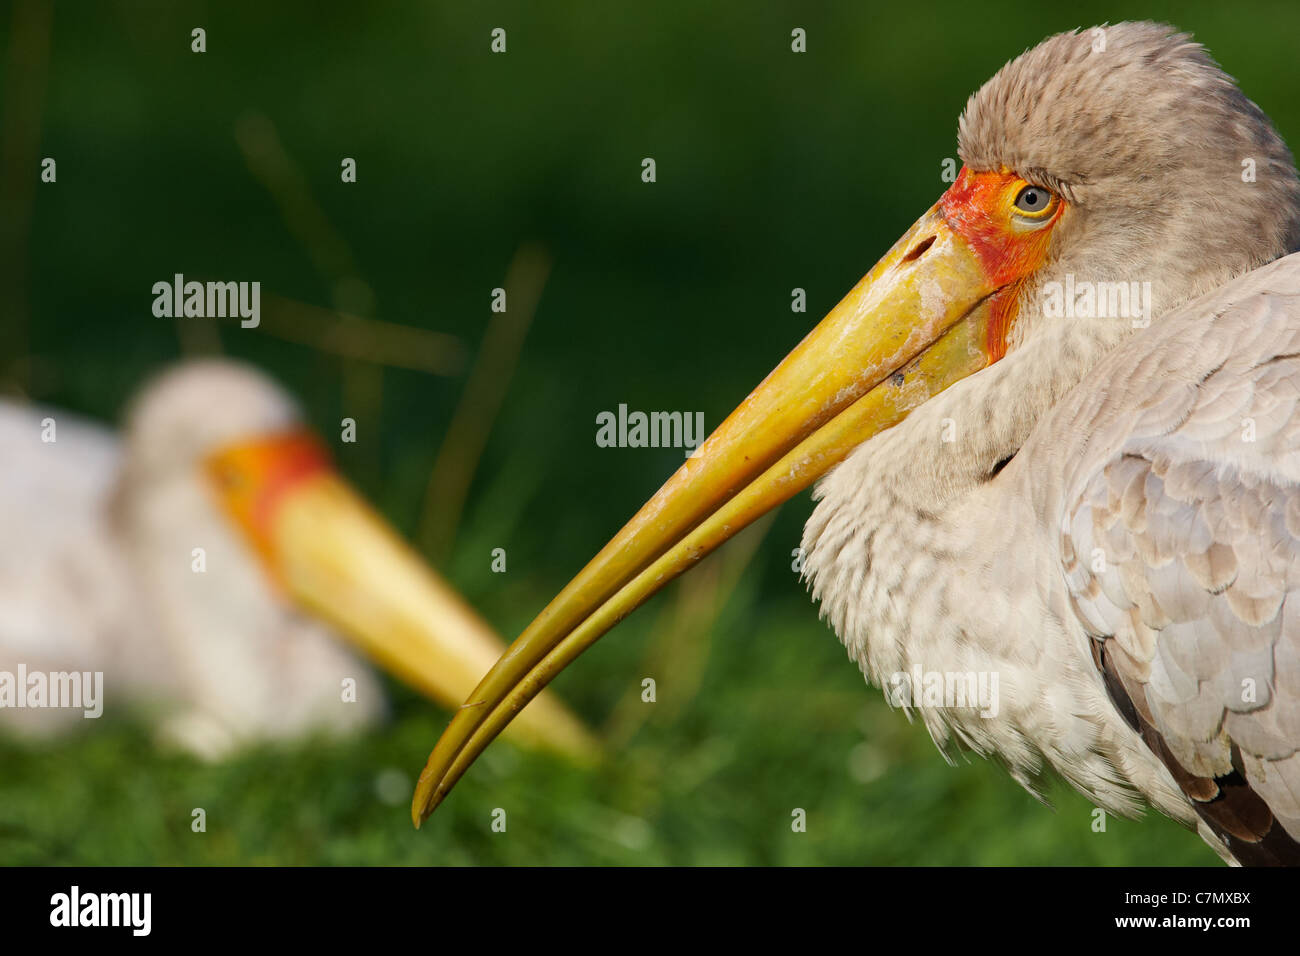 Two Painted Storks on a green field of grass Stock Photo